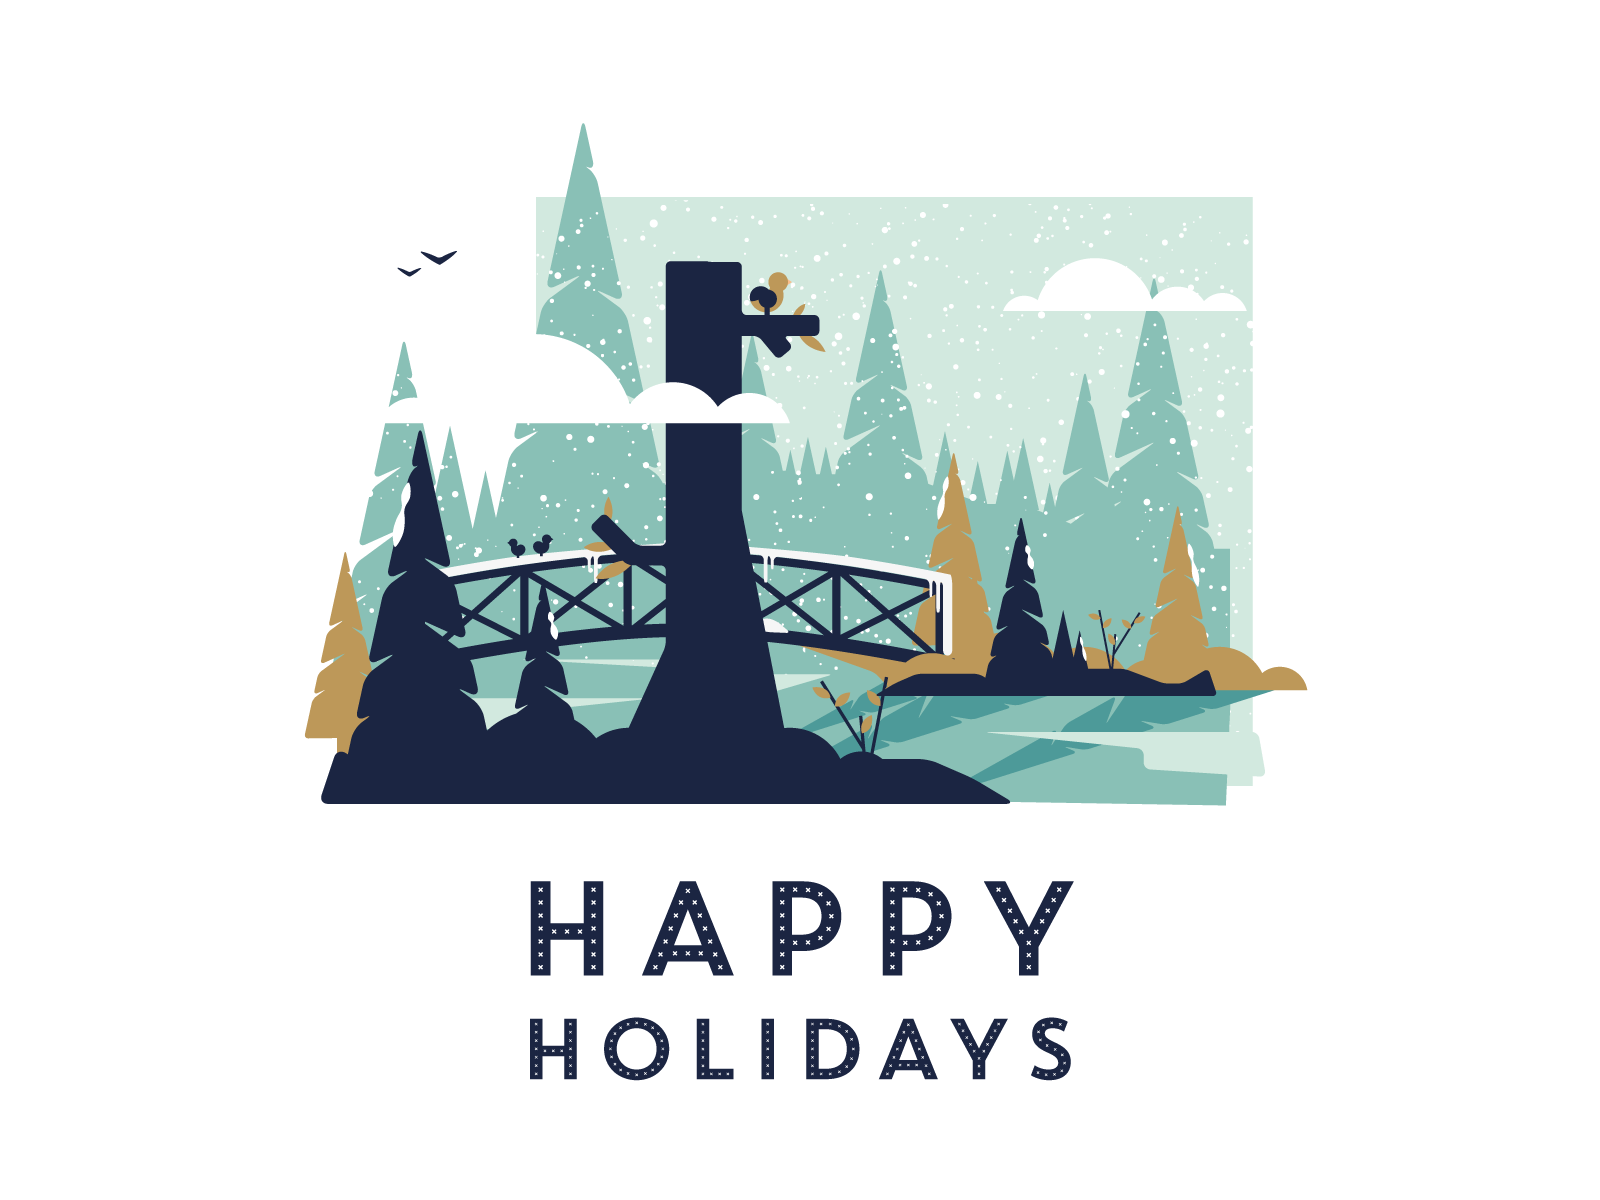 Christmas Card Concept By Tom Wells On Dribbble